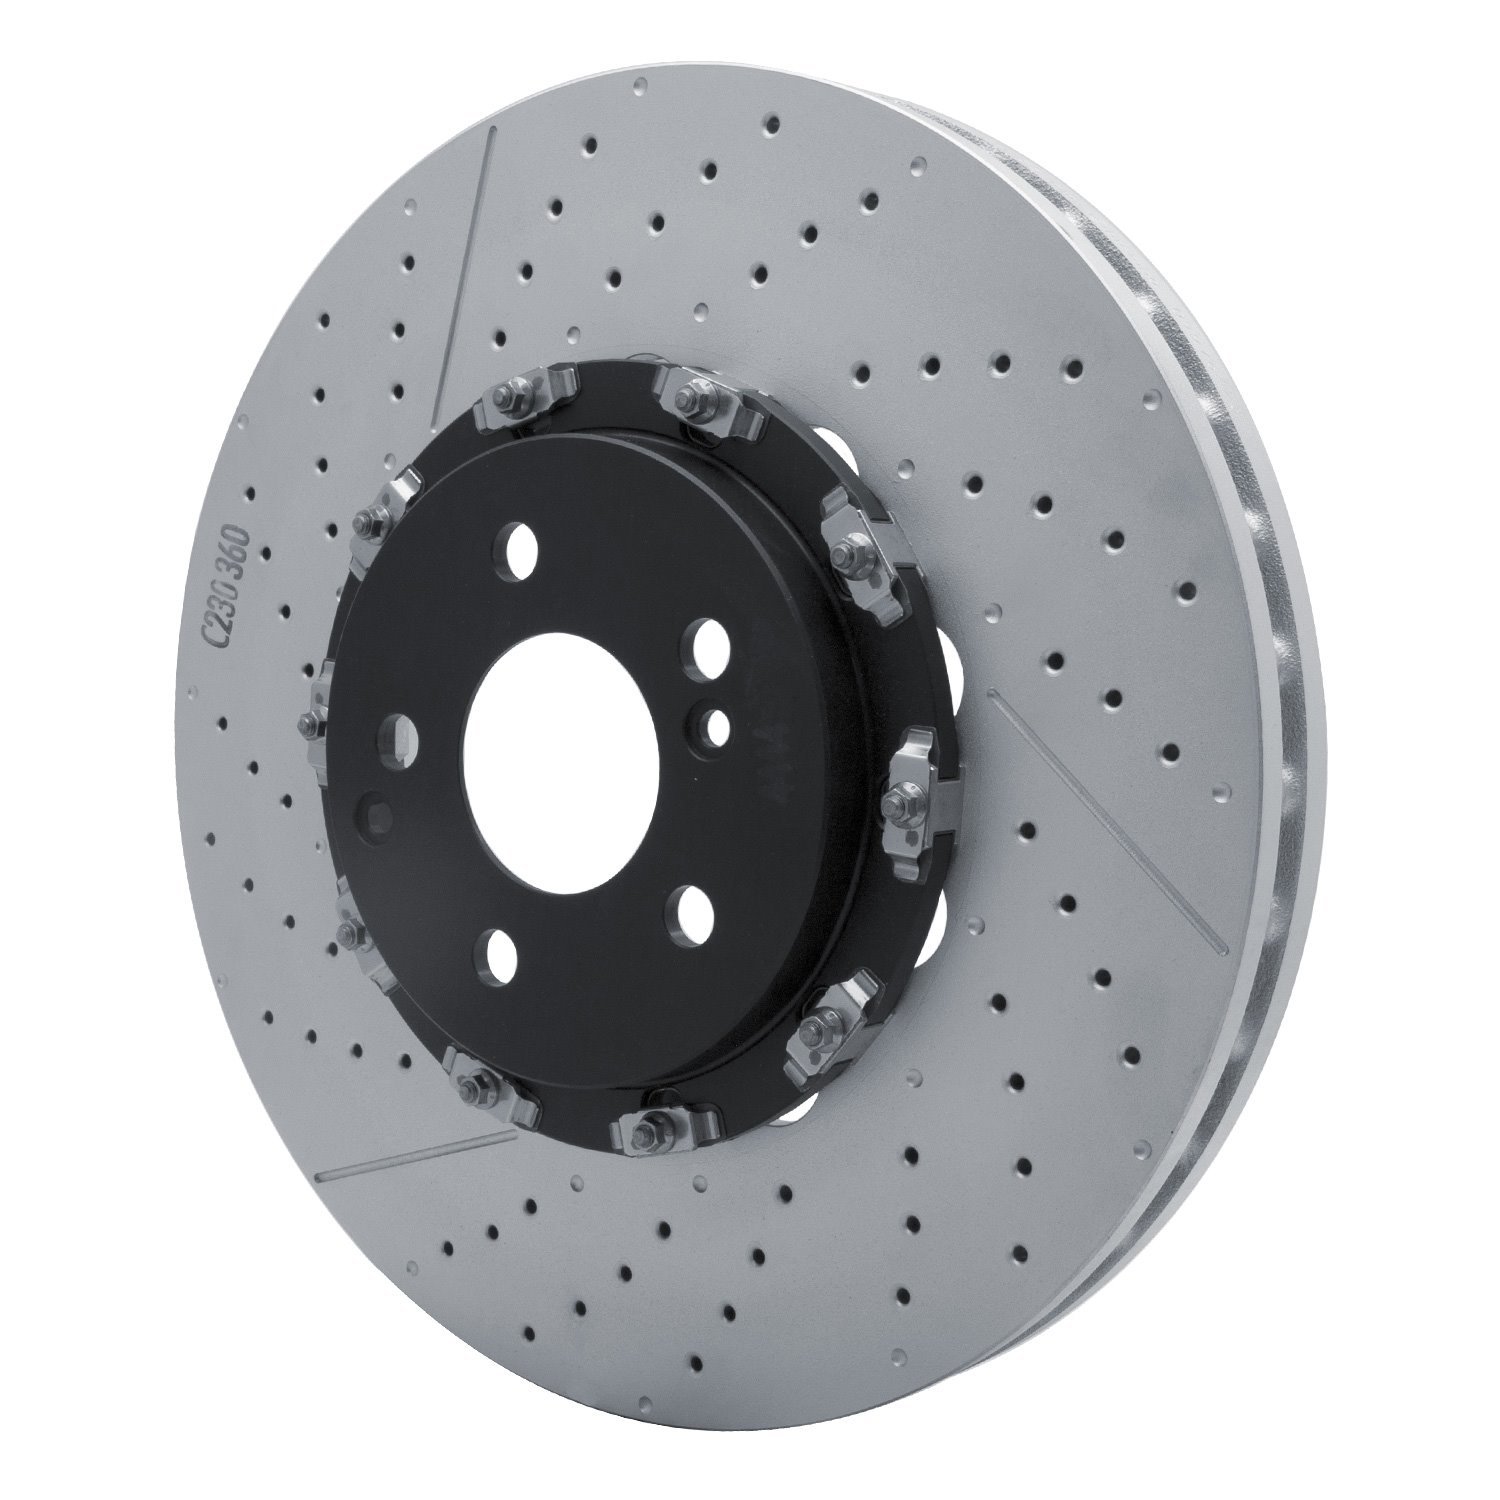 Hi-Carbon Alloy Geomet-Coated Drilled & Slotted Rotor,